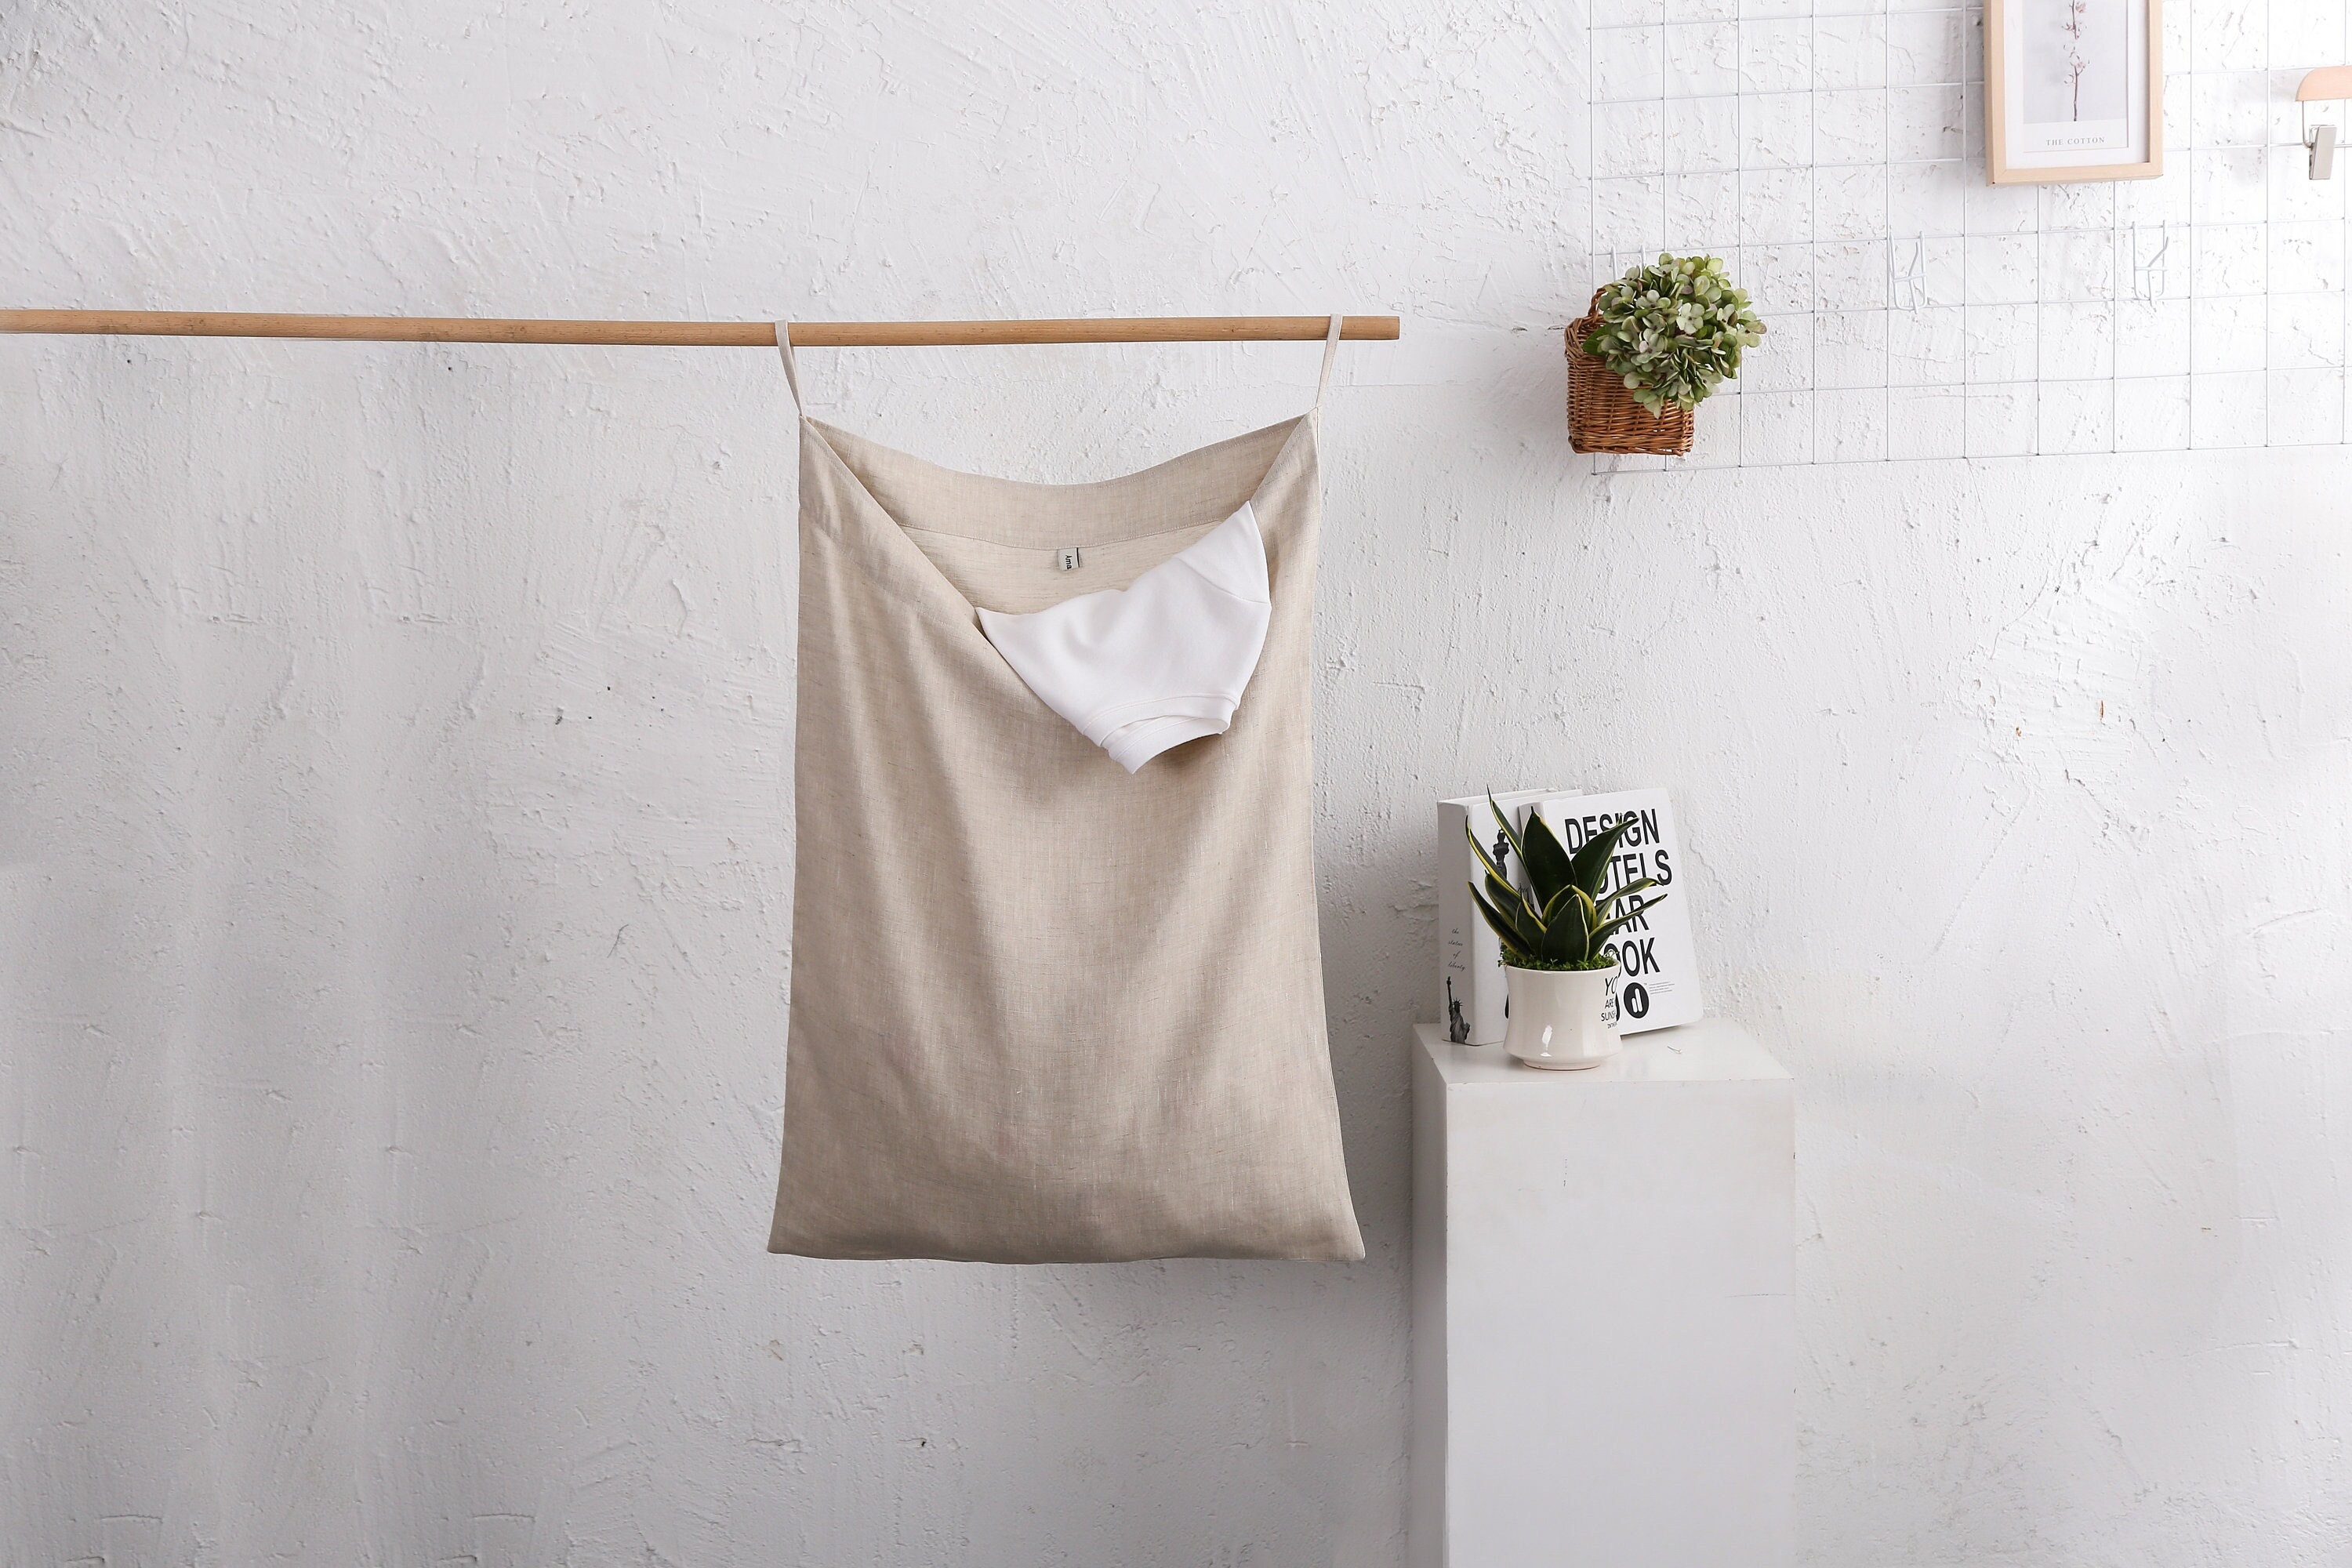 Large Linen Laundry Bag Clothes to Wash - Flax Camp Bag - Linen Storag